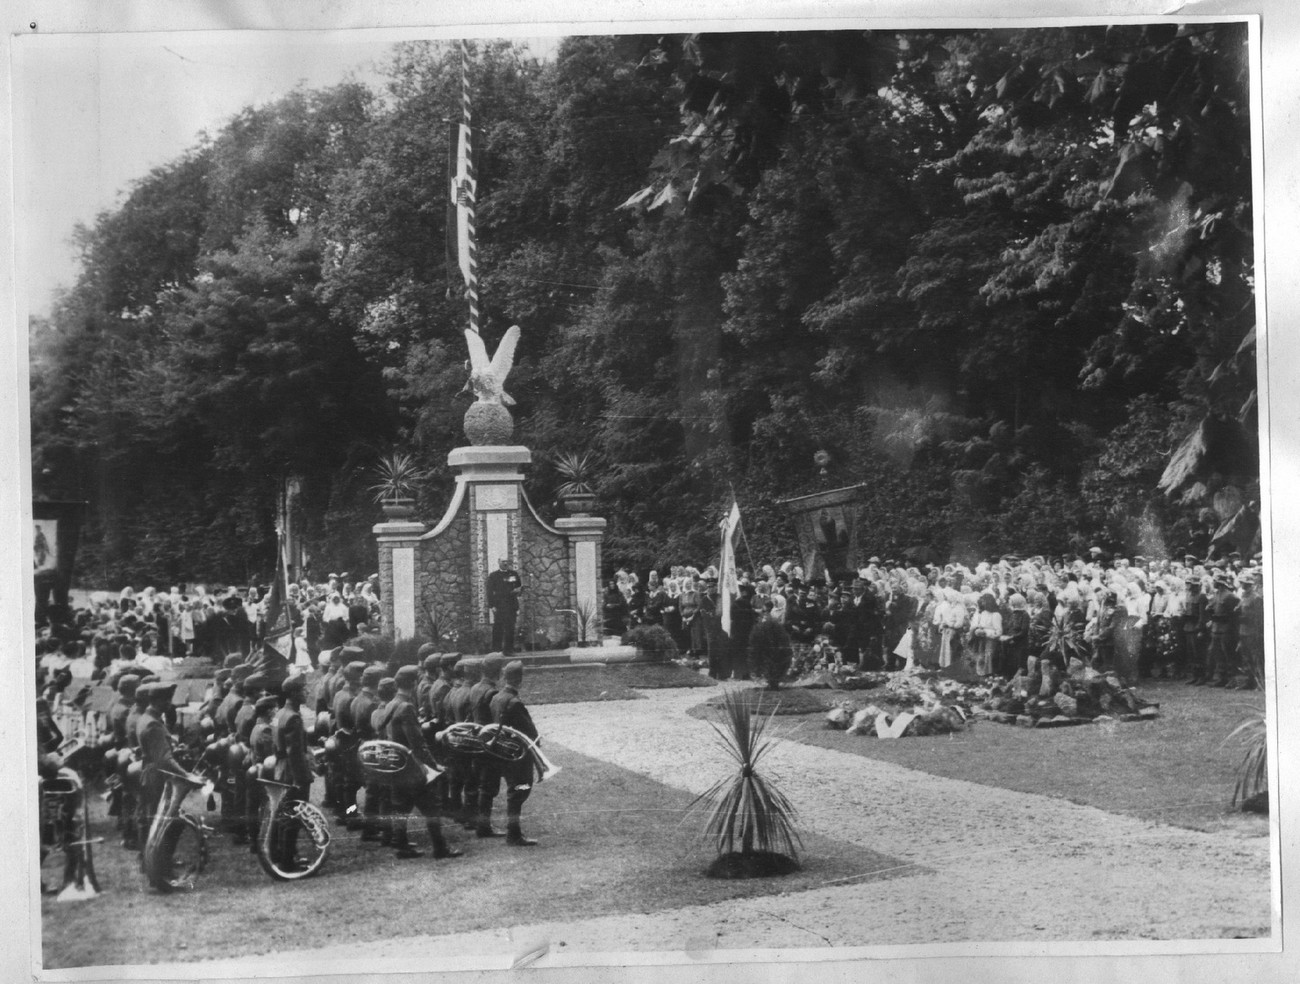 In many places throughout Prekmurje, Hungarian authorities hung the so-called State Flags (Országzászló) to symbolically show the annexation of Prekmurje to Hungary. The photograph shows the consecration ceremony of an Országzászló in Beltinci in 1942. Source: Göncz, Felszabadulás vagy megszállás. MNMI, 105.